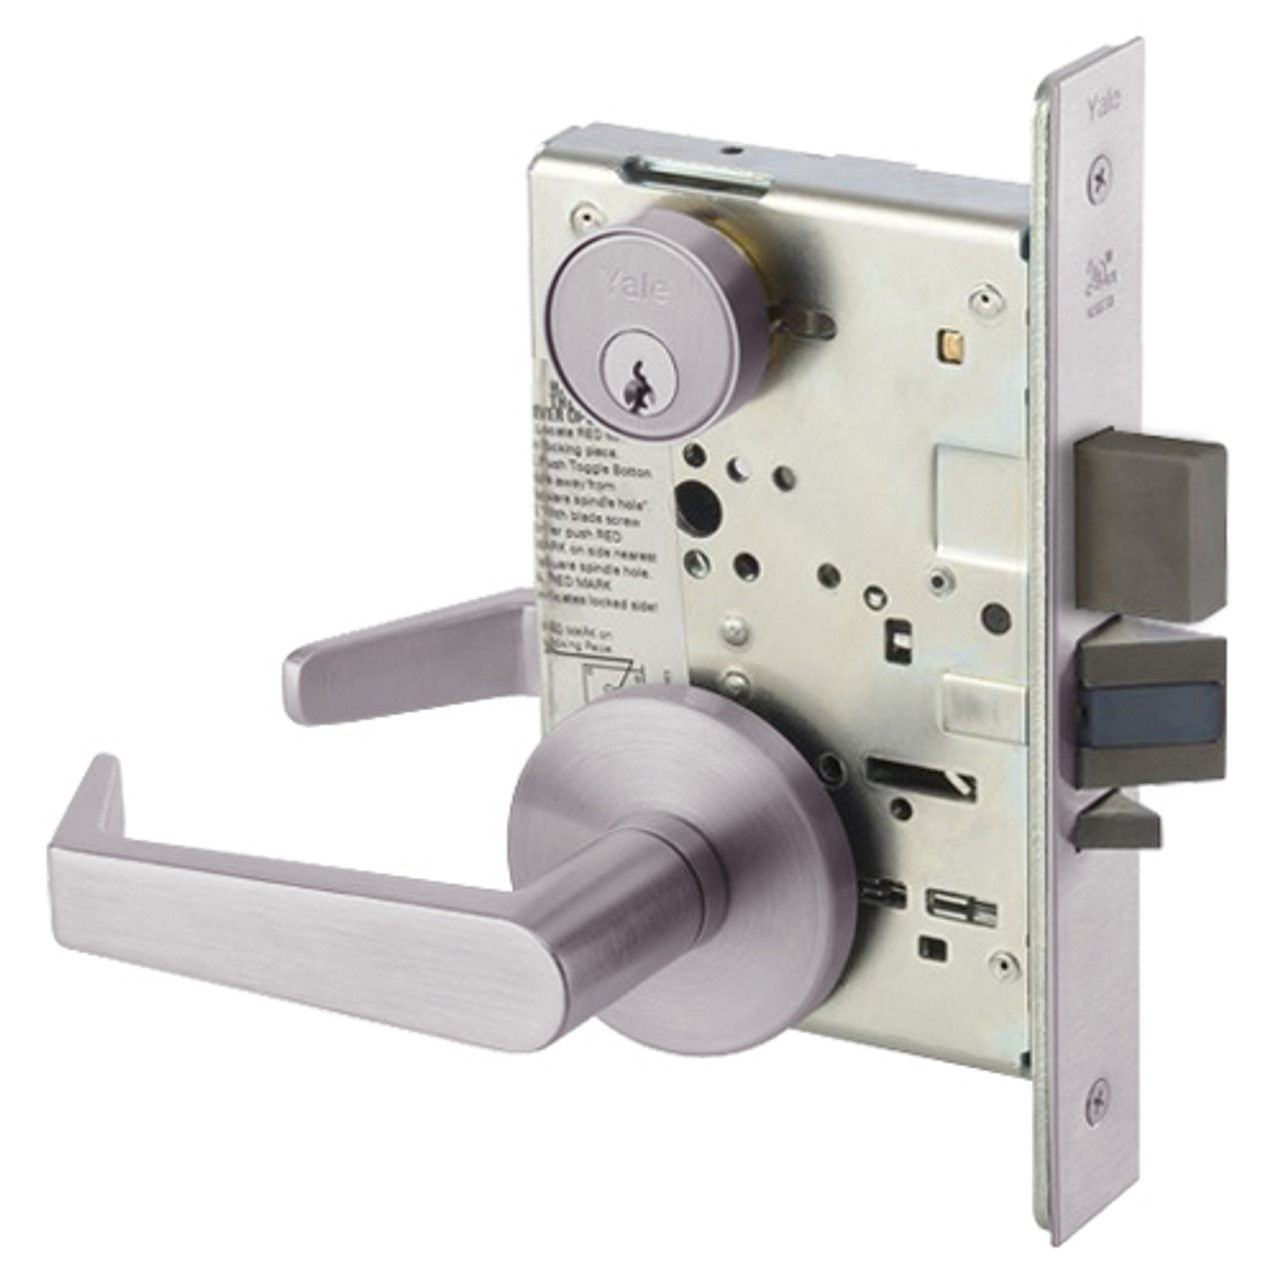 AUR8812-2FL-630 Yale 8800FL Series Double Cylinder Mortise Classroom Security Deadbolt Locks with Augusta Lever in Satin Stainless Steel